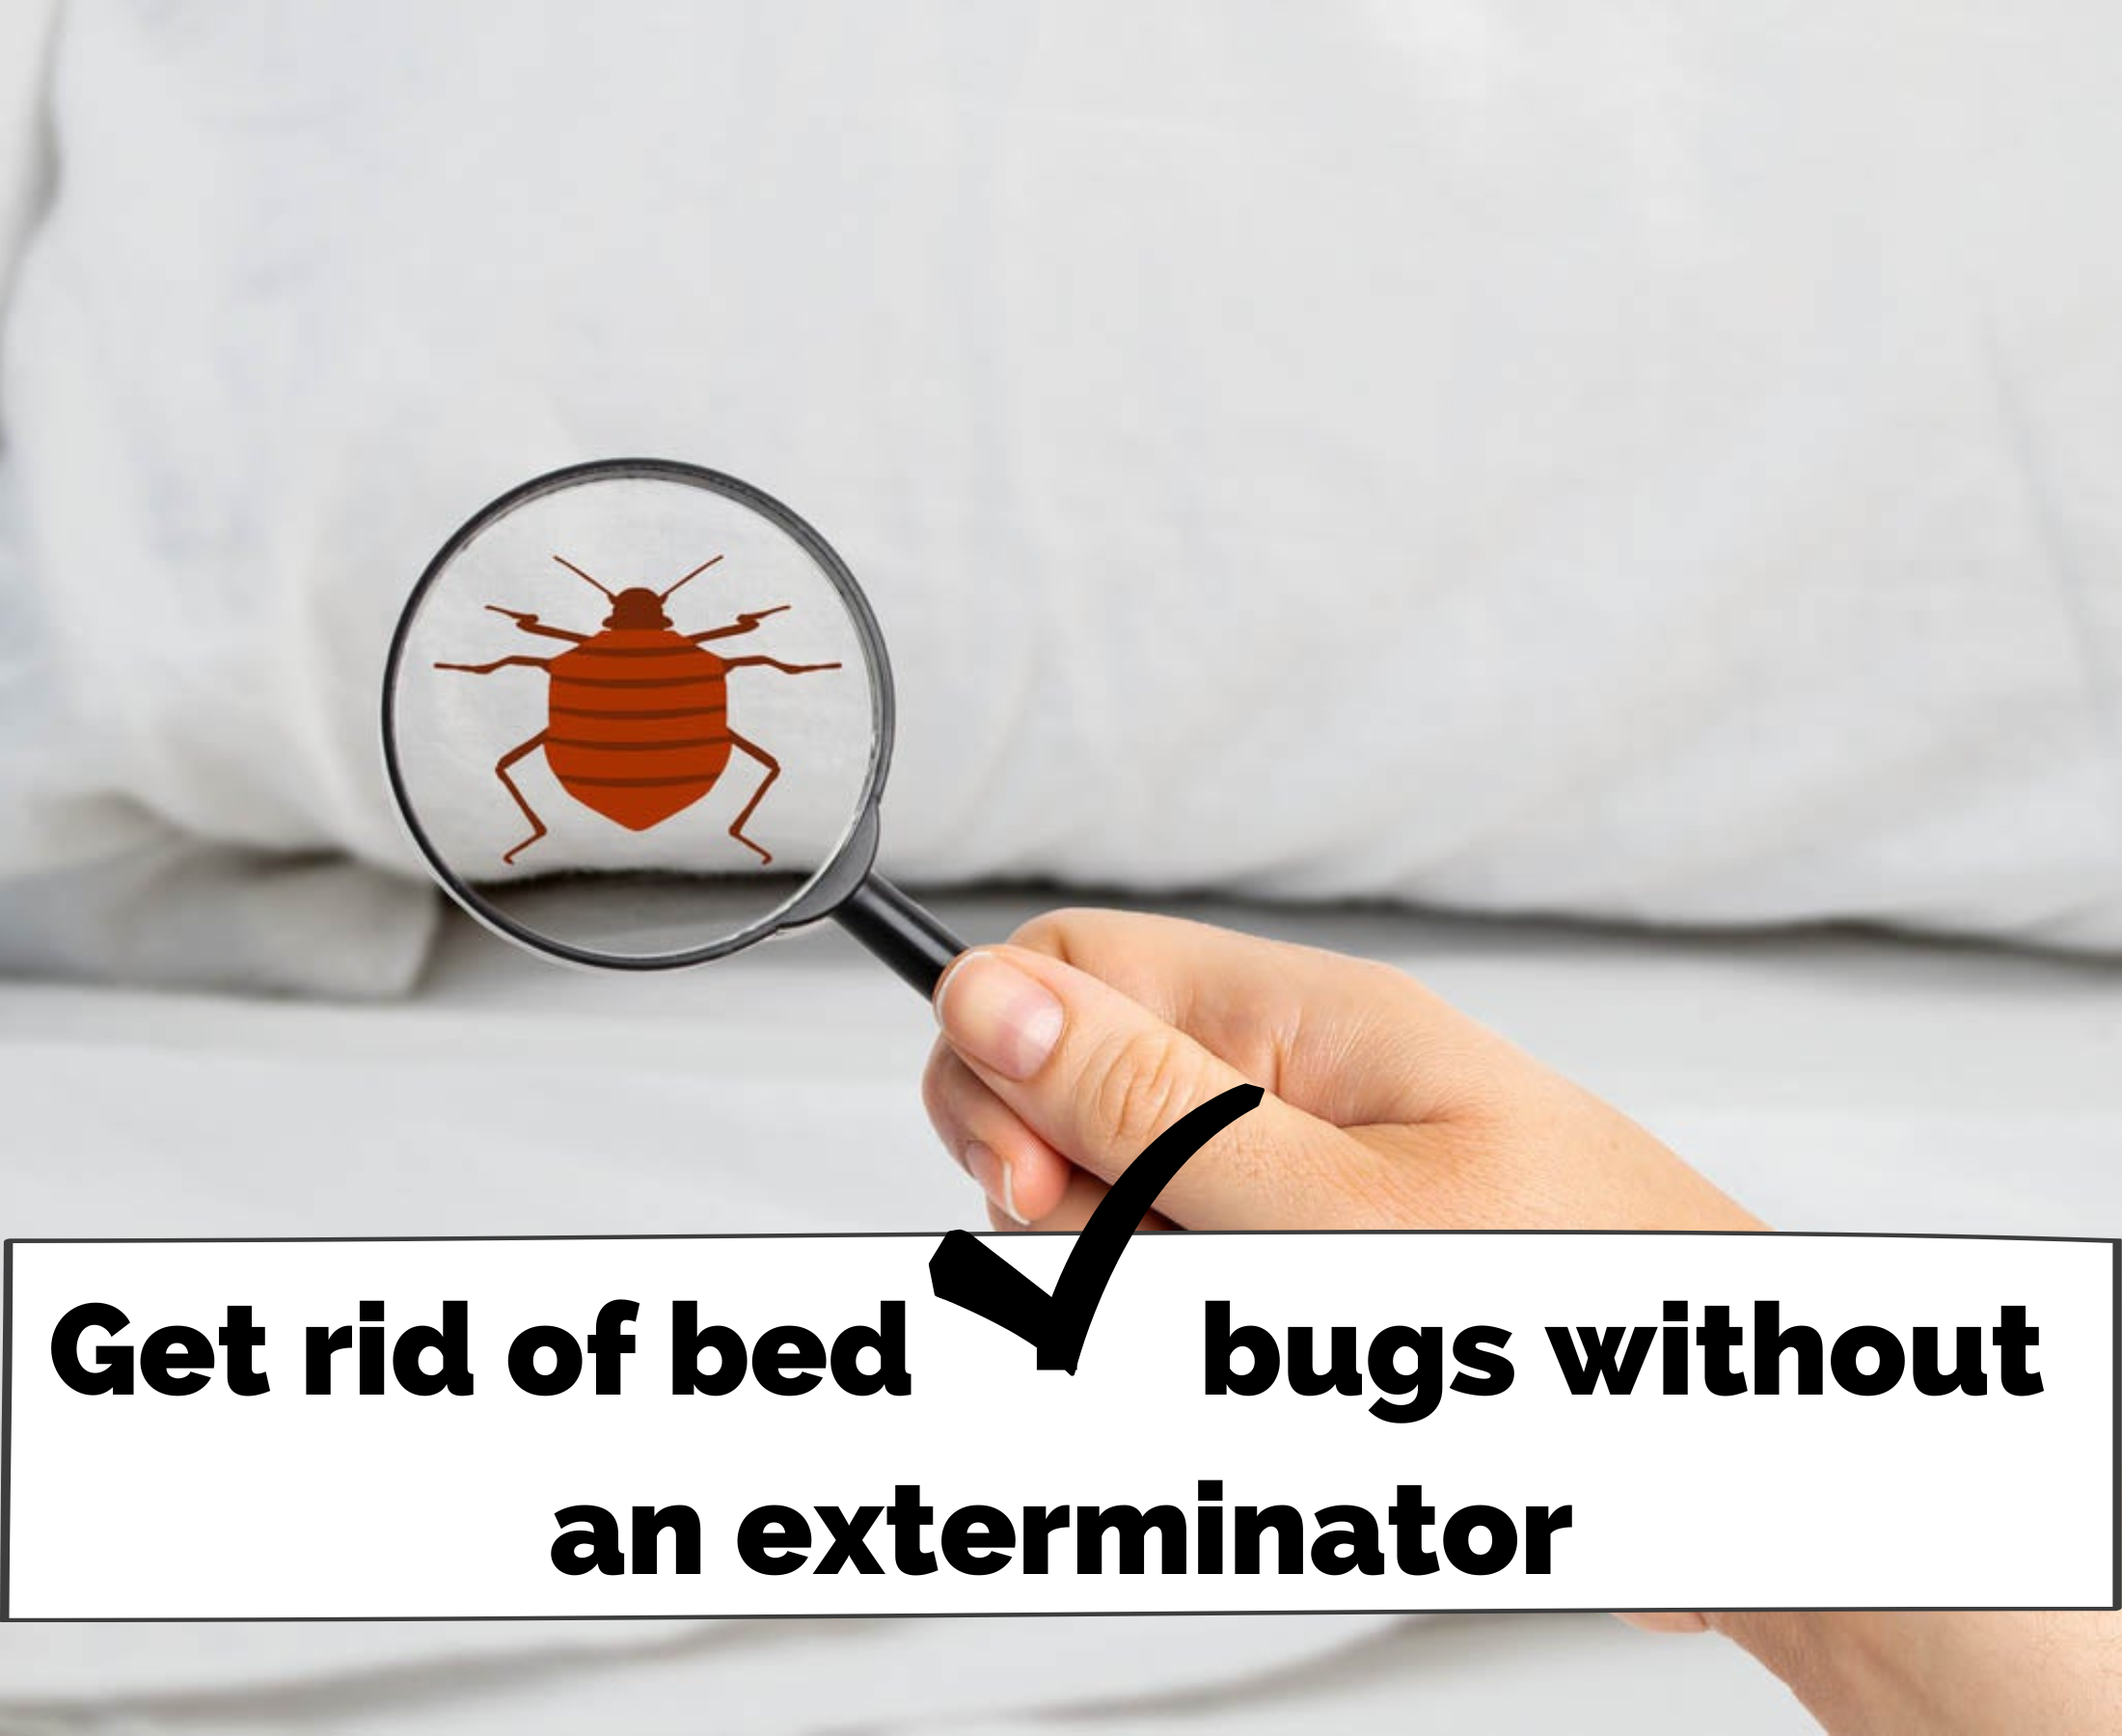 How to get rid of bedbugs without an exterminator?